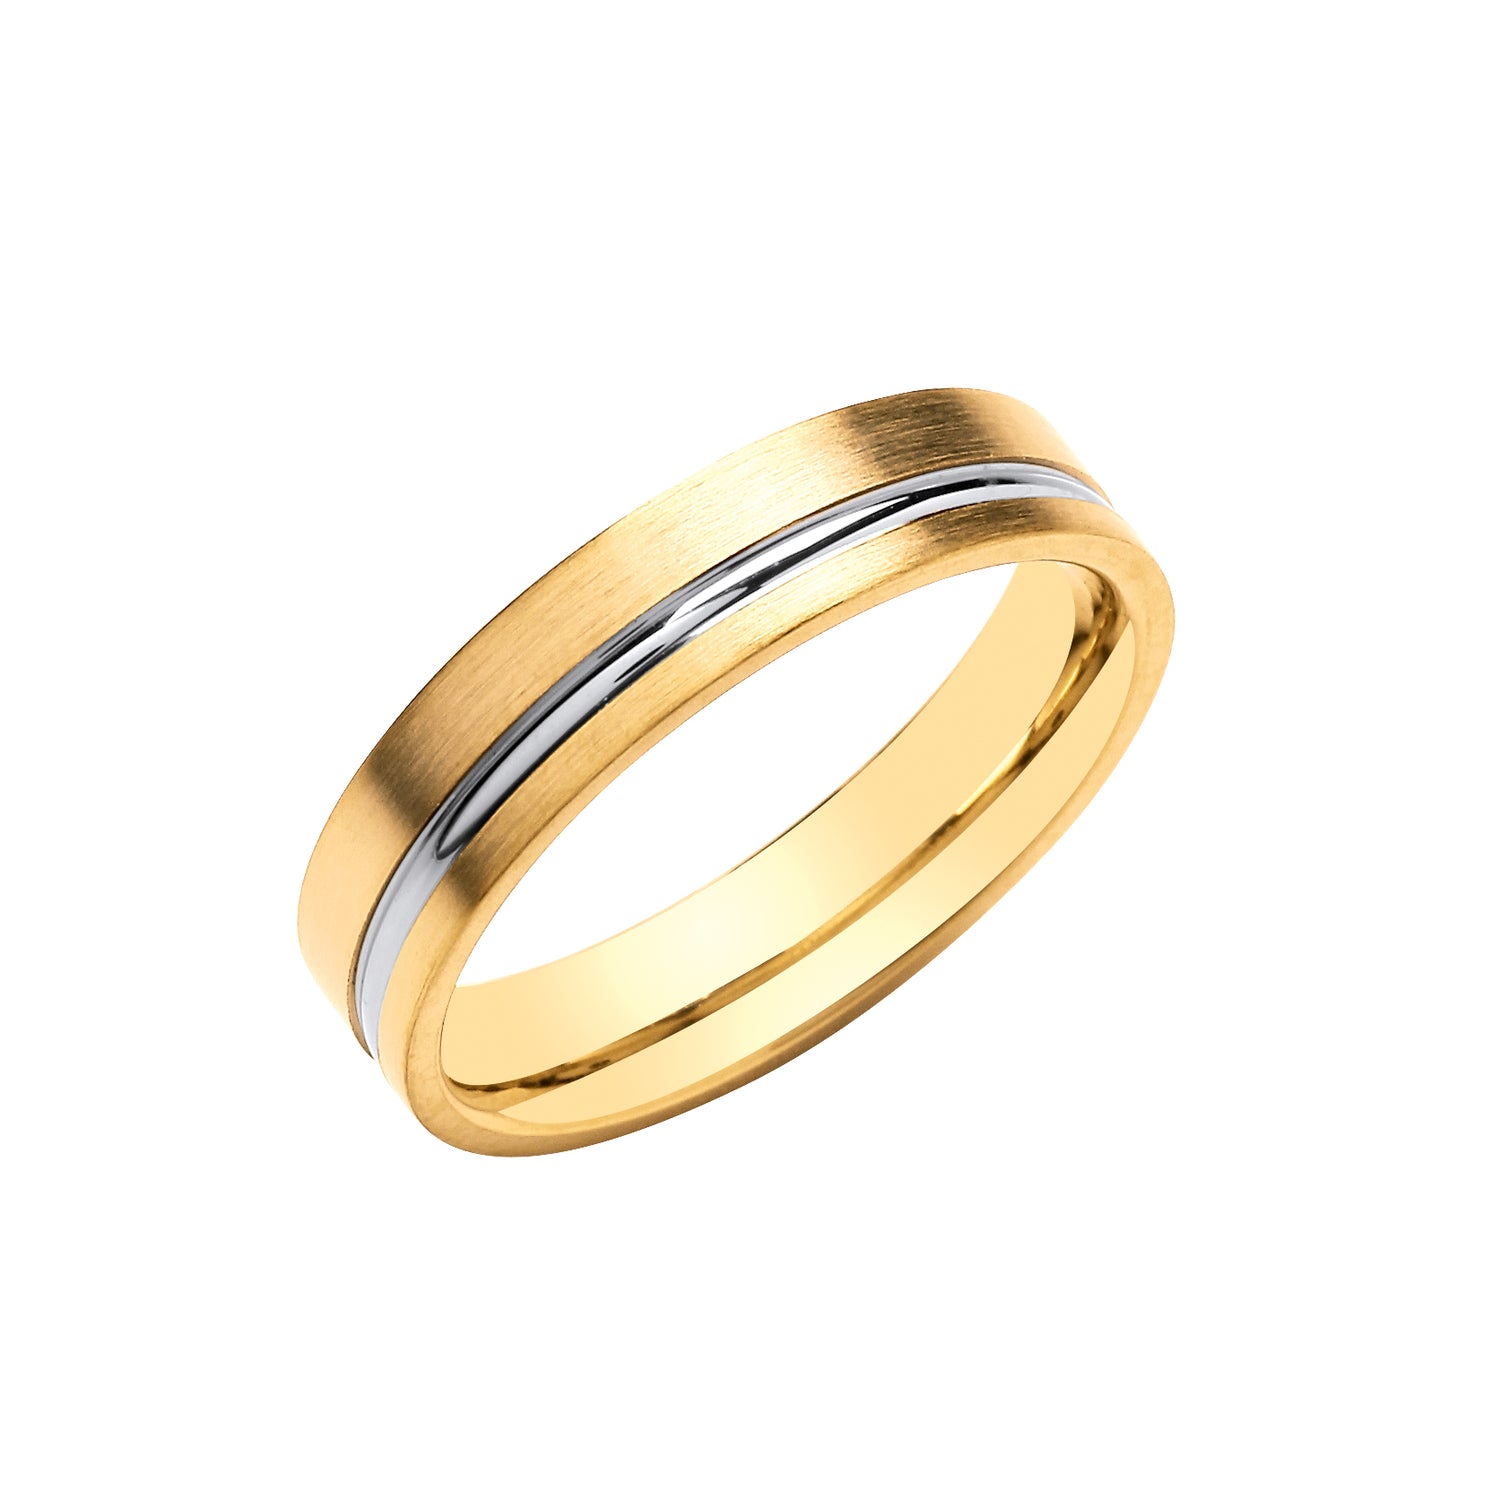 5mm 9CT Two Colour Gold Groove Wedding Band - Robert Anthony Jewellers, Edinburgh